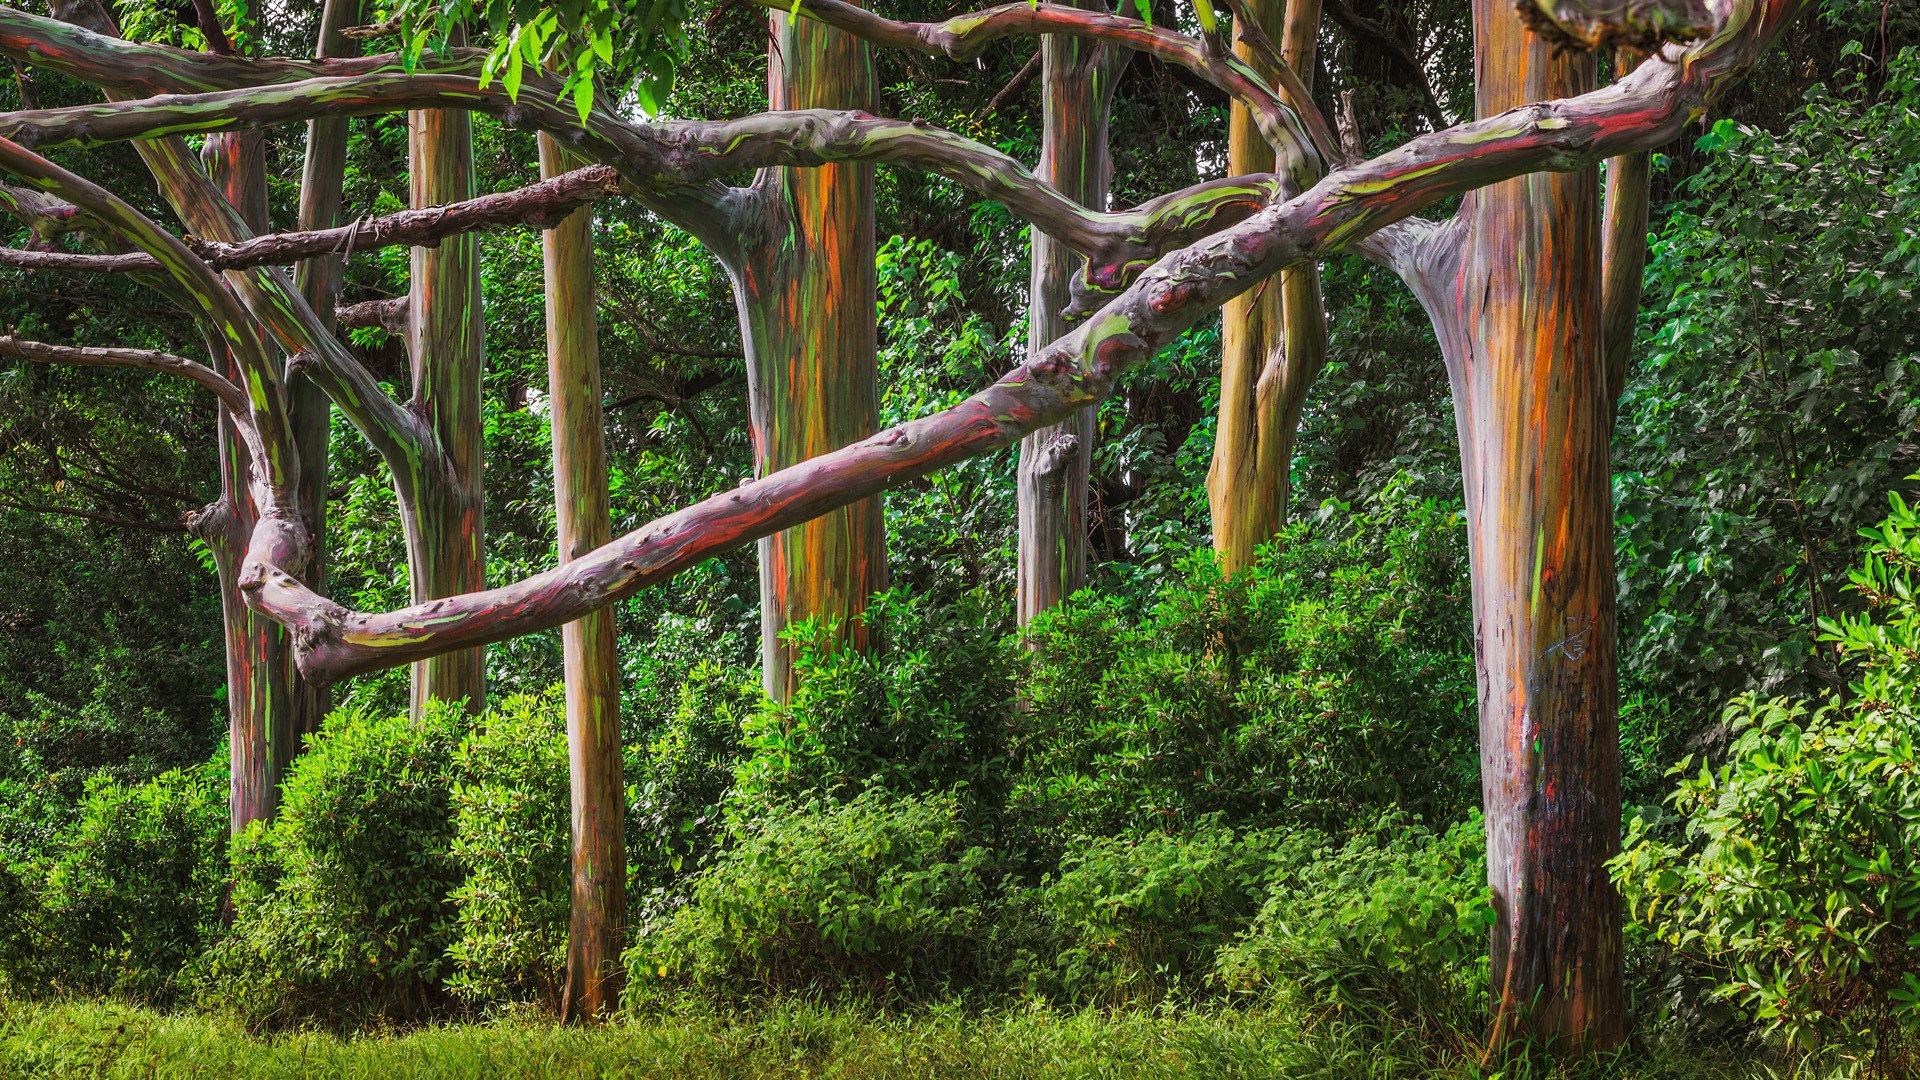 General 1920x1080 forest Hawaii USA plants trees branch Eucalyptus rainbows leaves